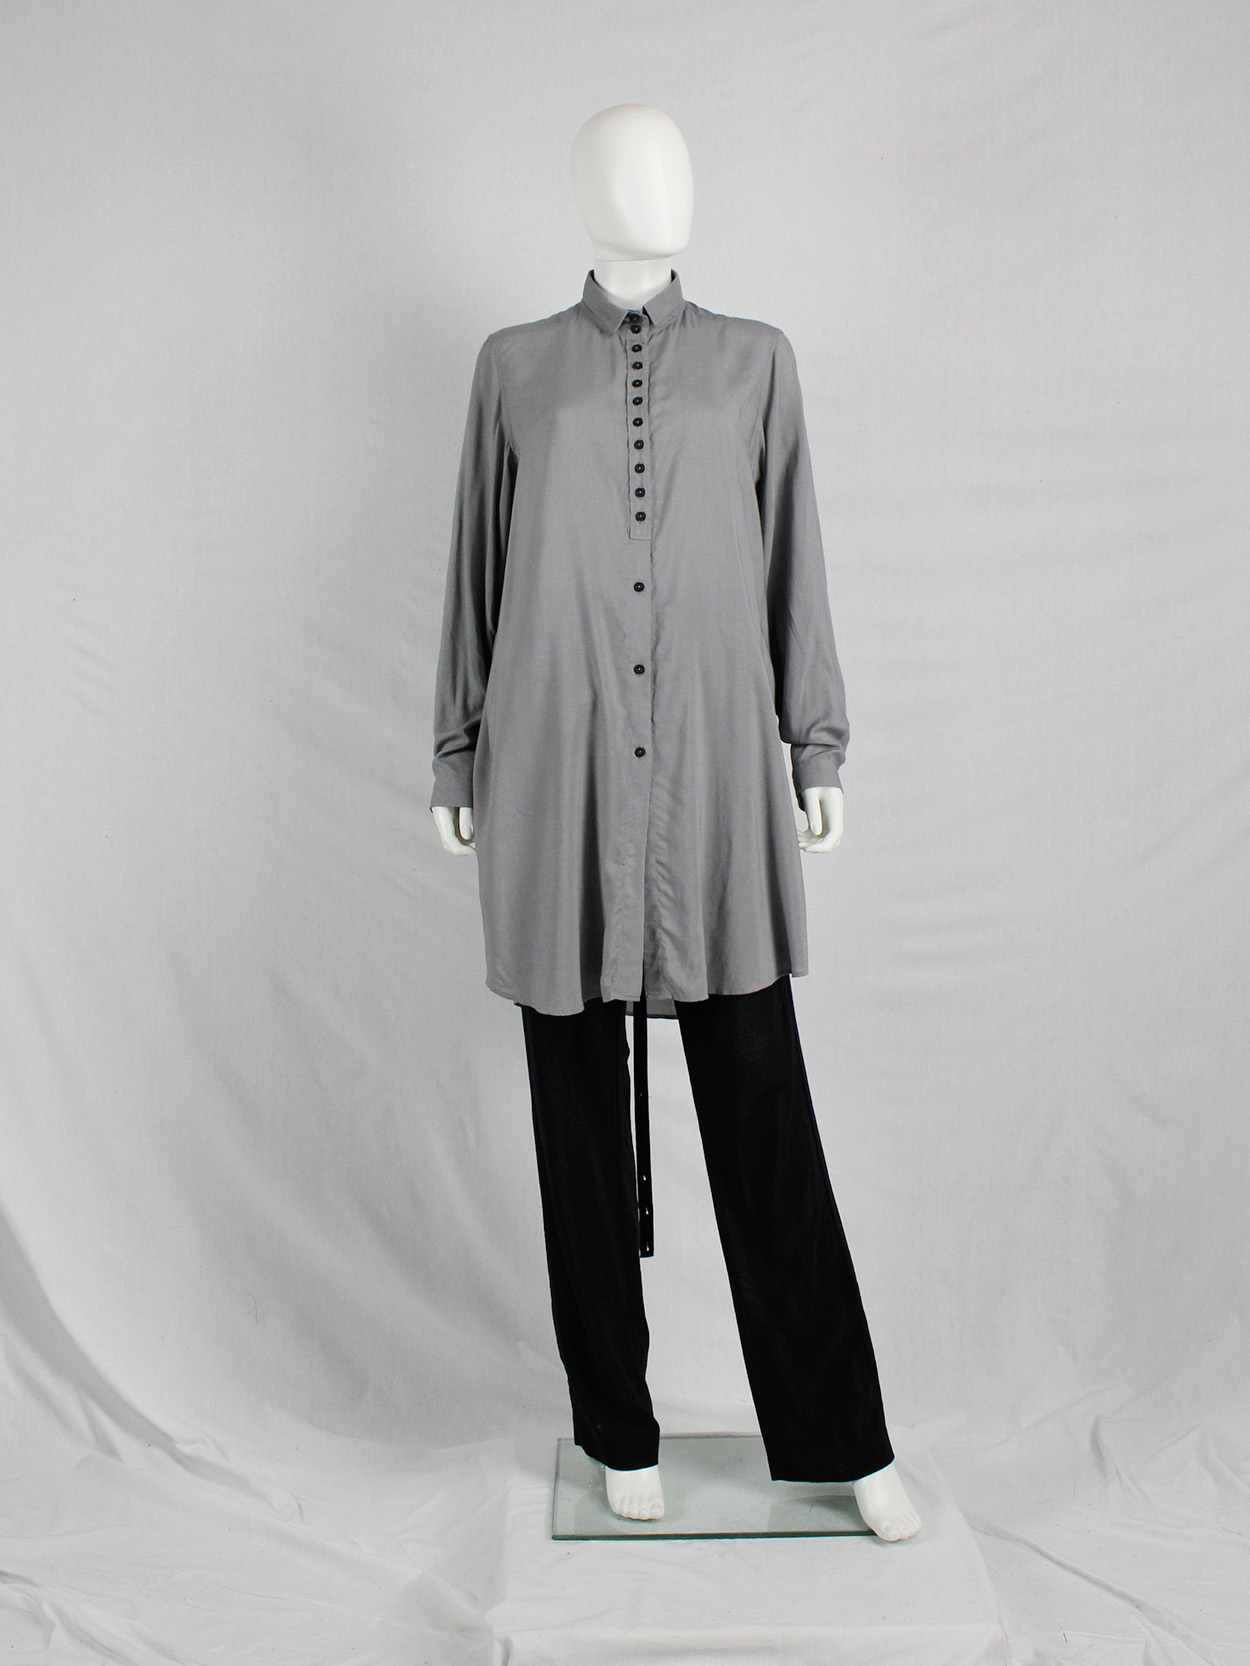 Ann Demeulemeester grey long shirt with many black buttons - V A N II T A S